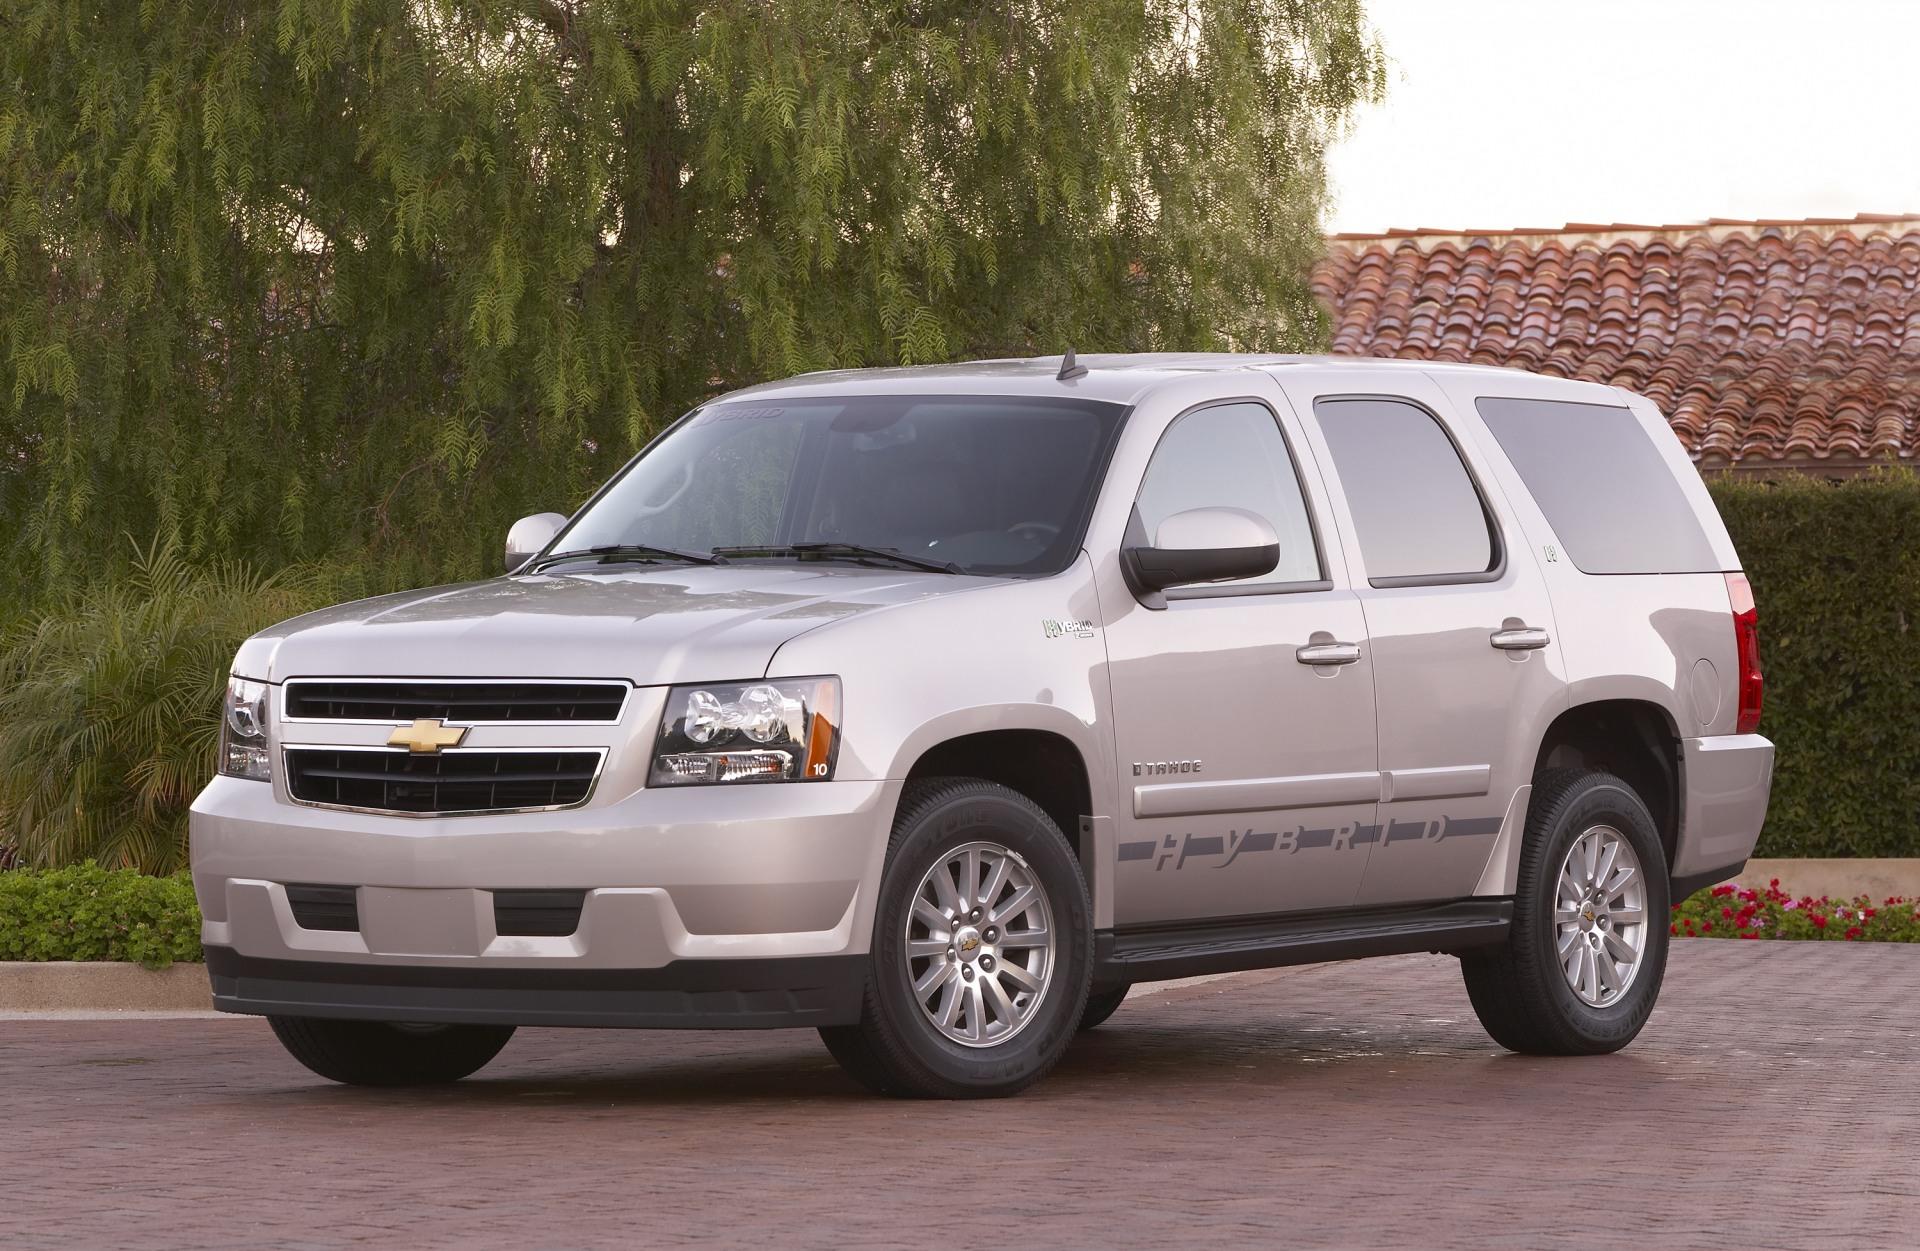 2009 Chevy Tahoe Value